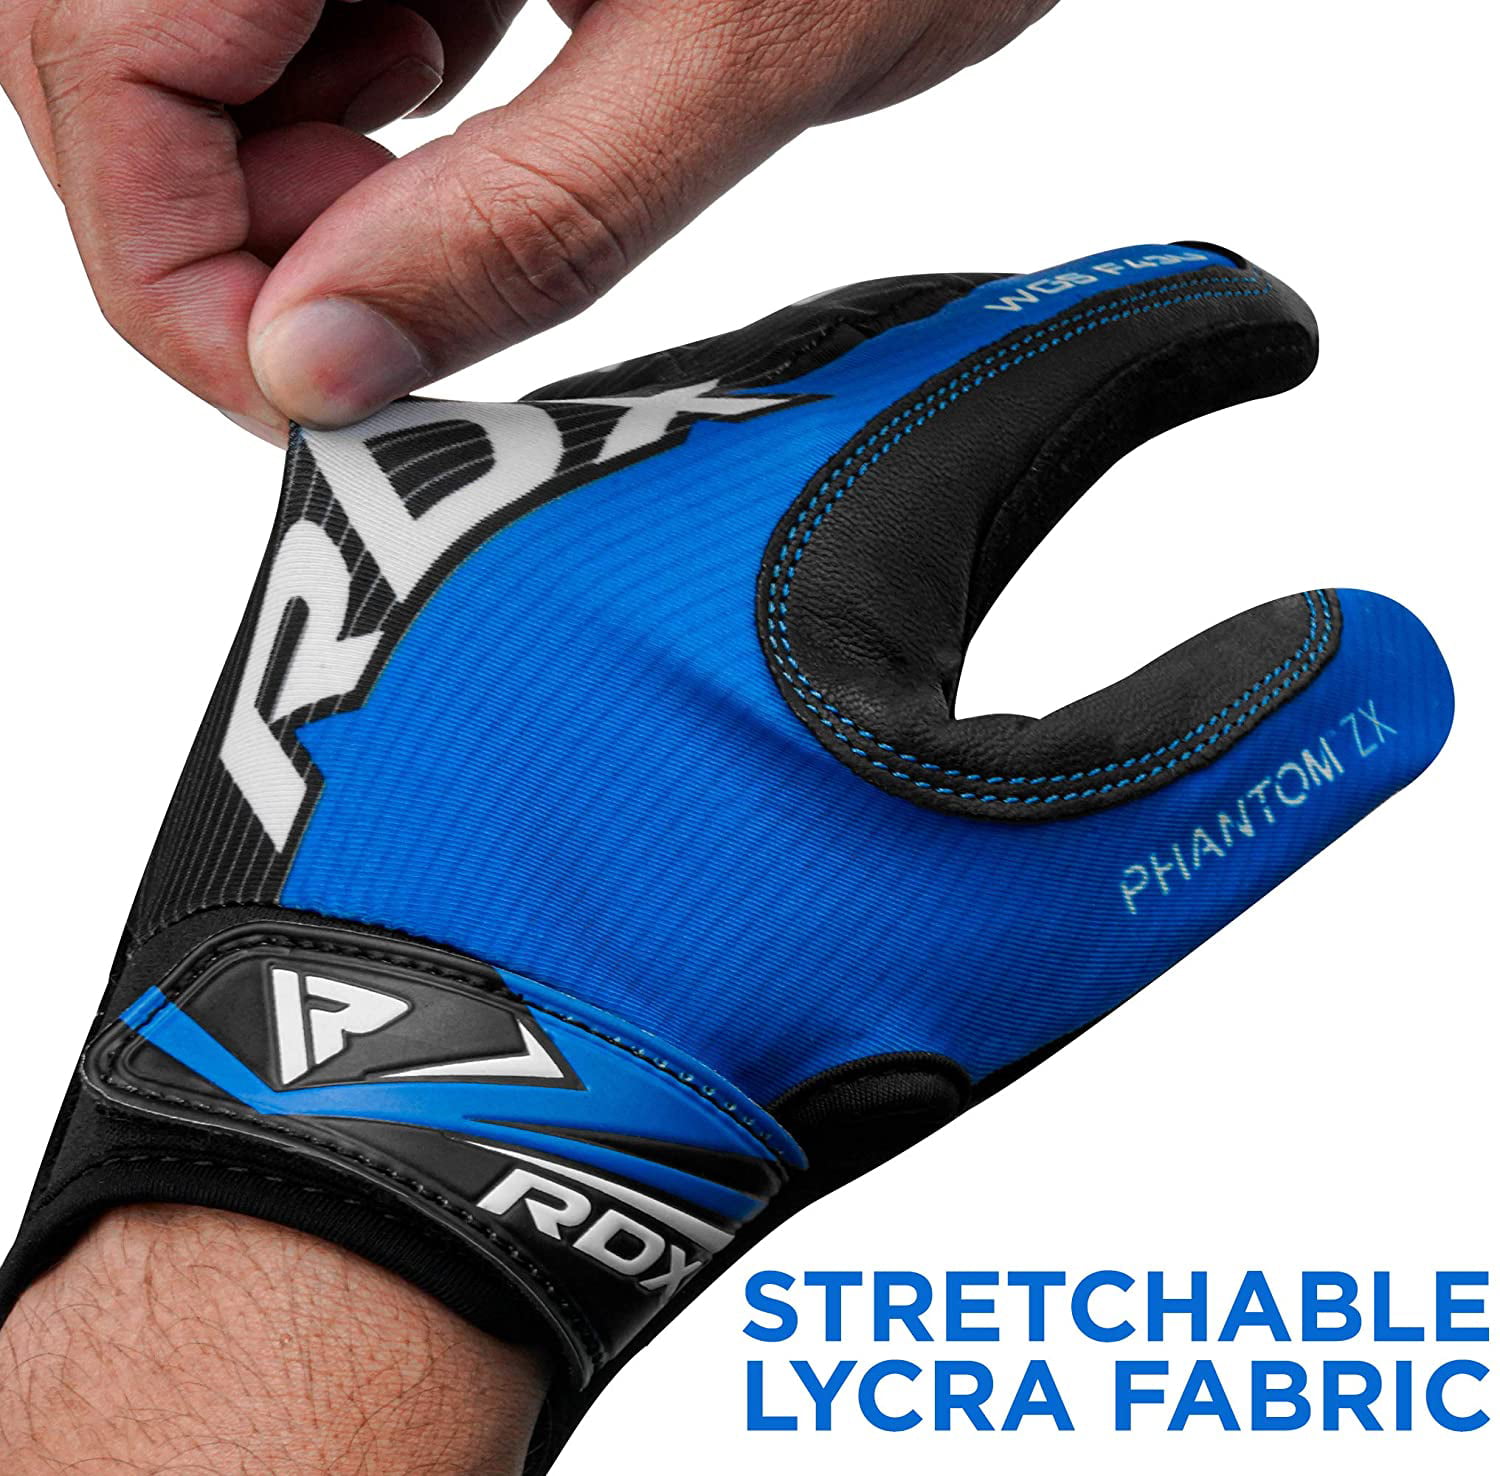 Gxmmat Non-Slip Breathable Workout Gloves for Gym